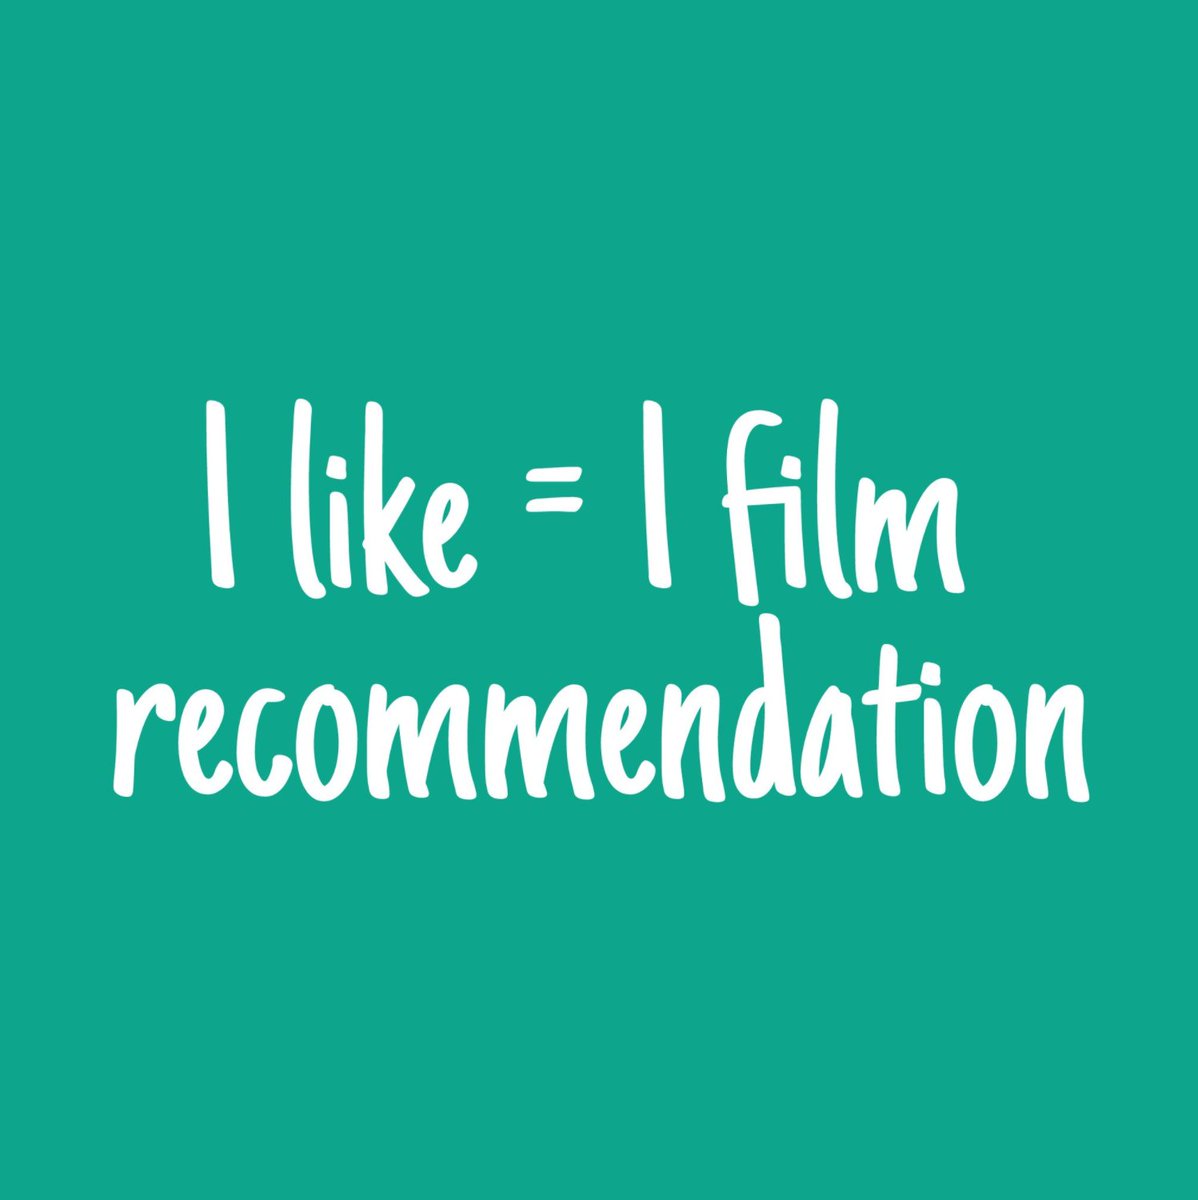 i wanna do this because i love spreading around great movies that should be watched by a lot of people